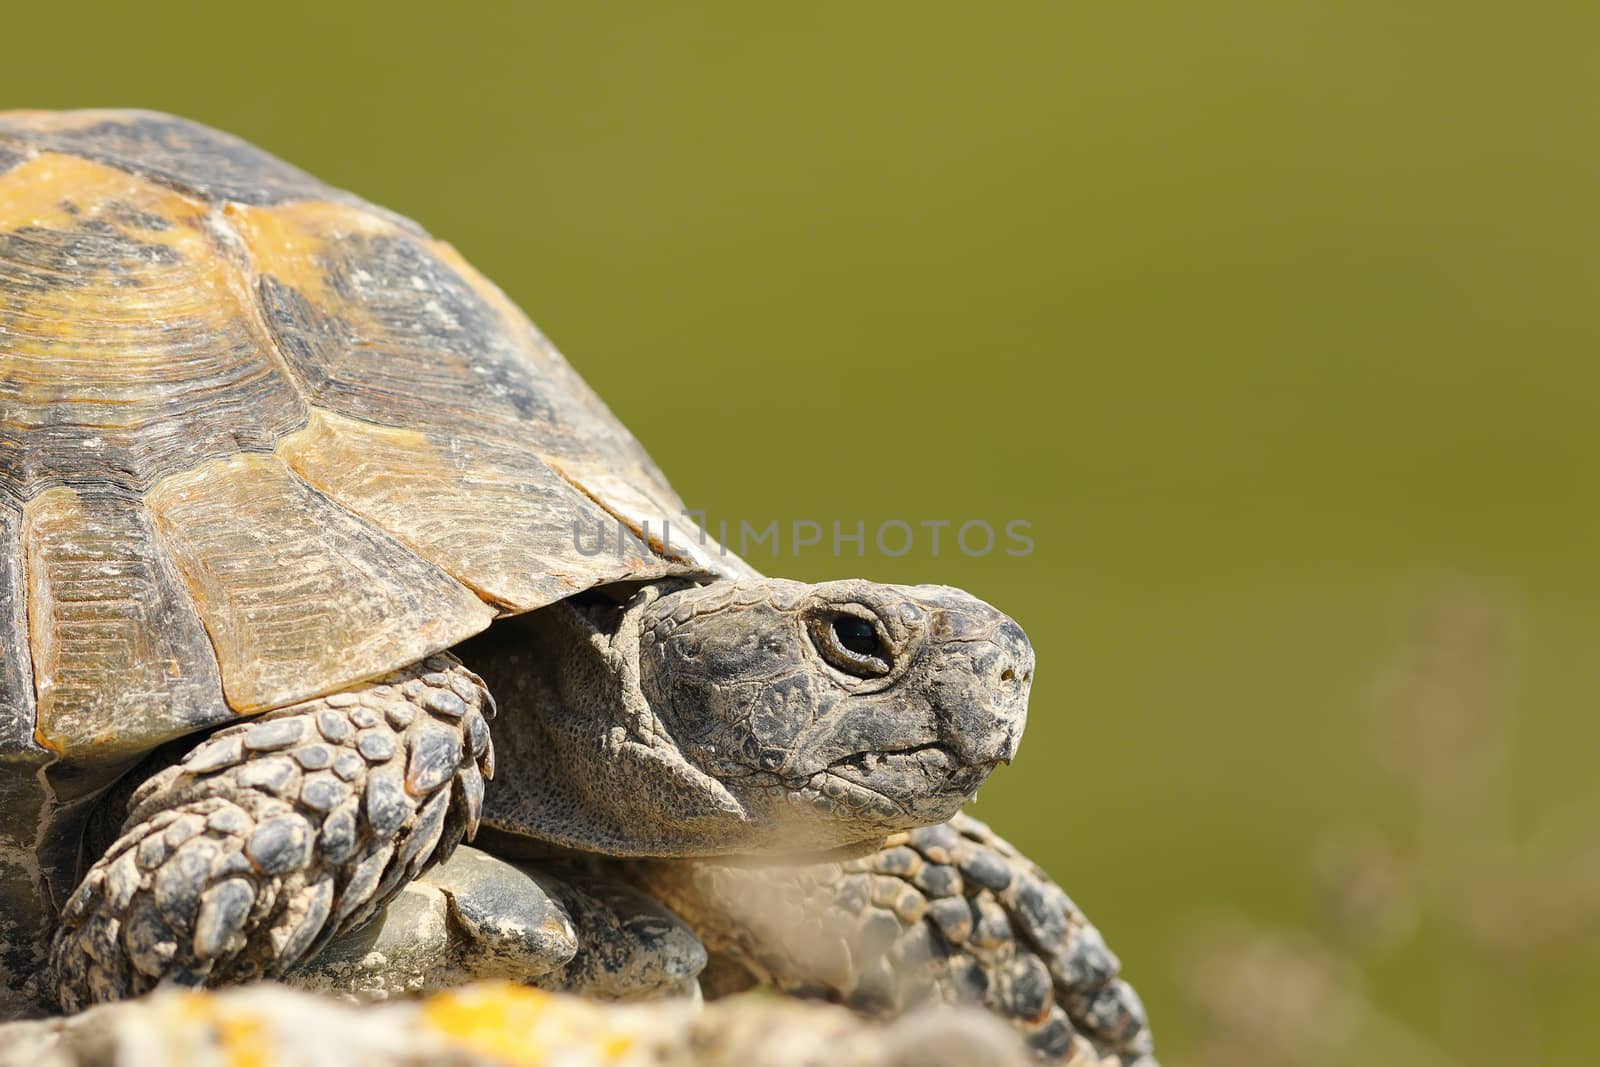 greek turtoise portrait or spur-thighed tortoise ( Testudo graeca ) over green out of focus background; this animal from the wild was just hatched from hibernation